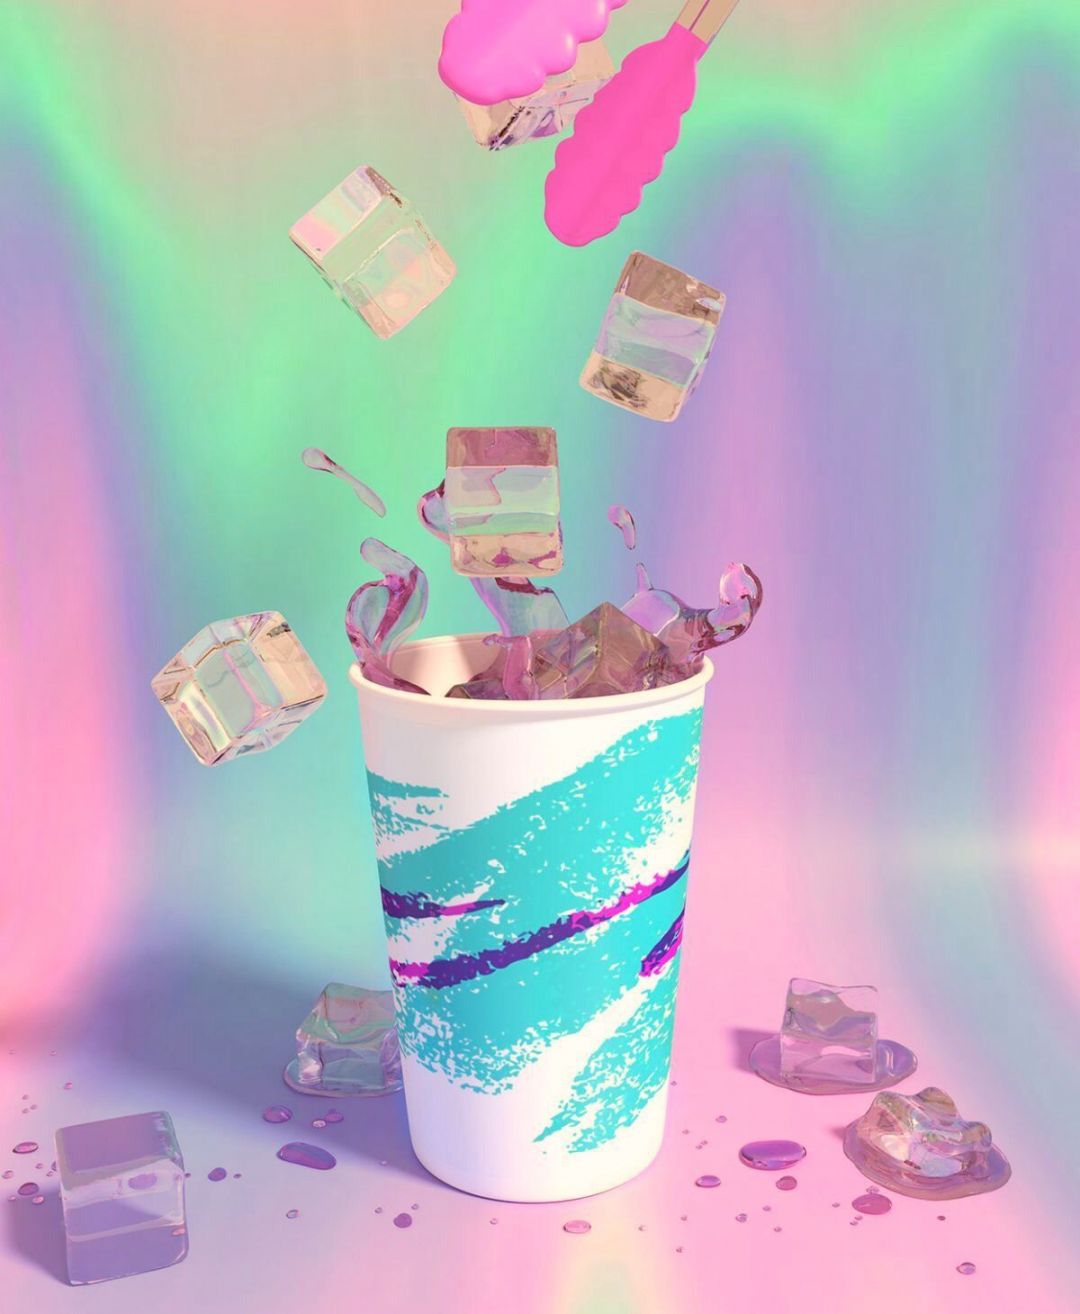 A cup of ice with colorful water droplets - Vaporwave, 3D